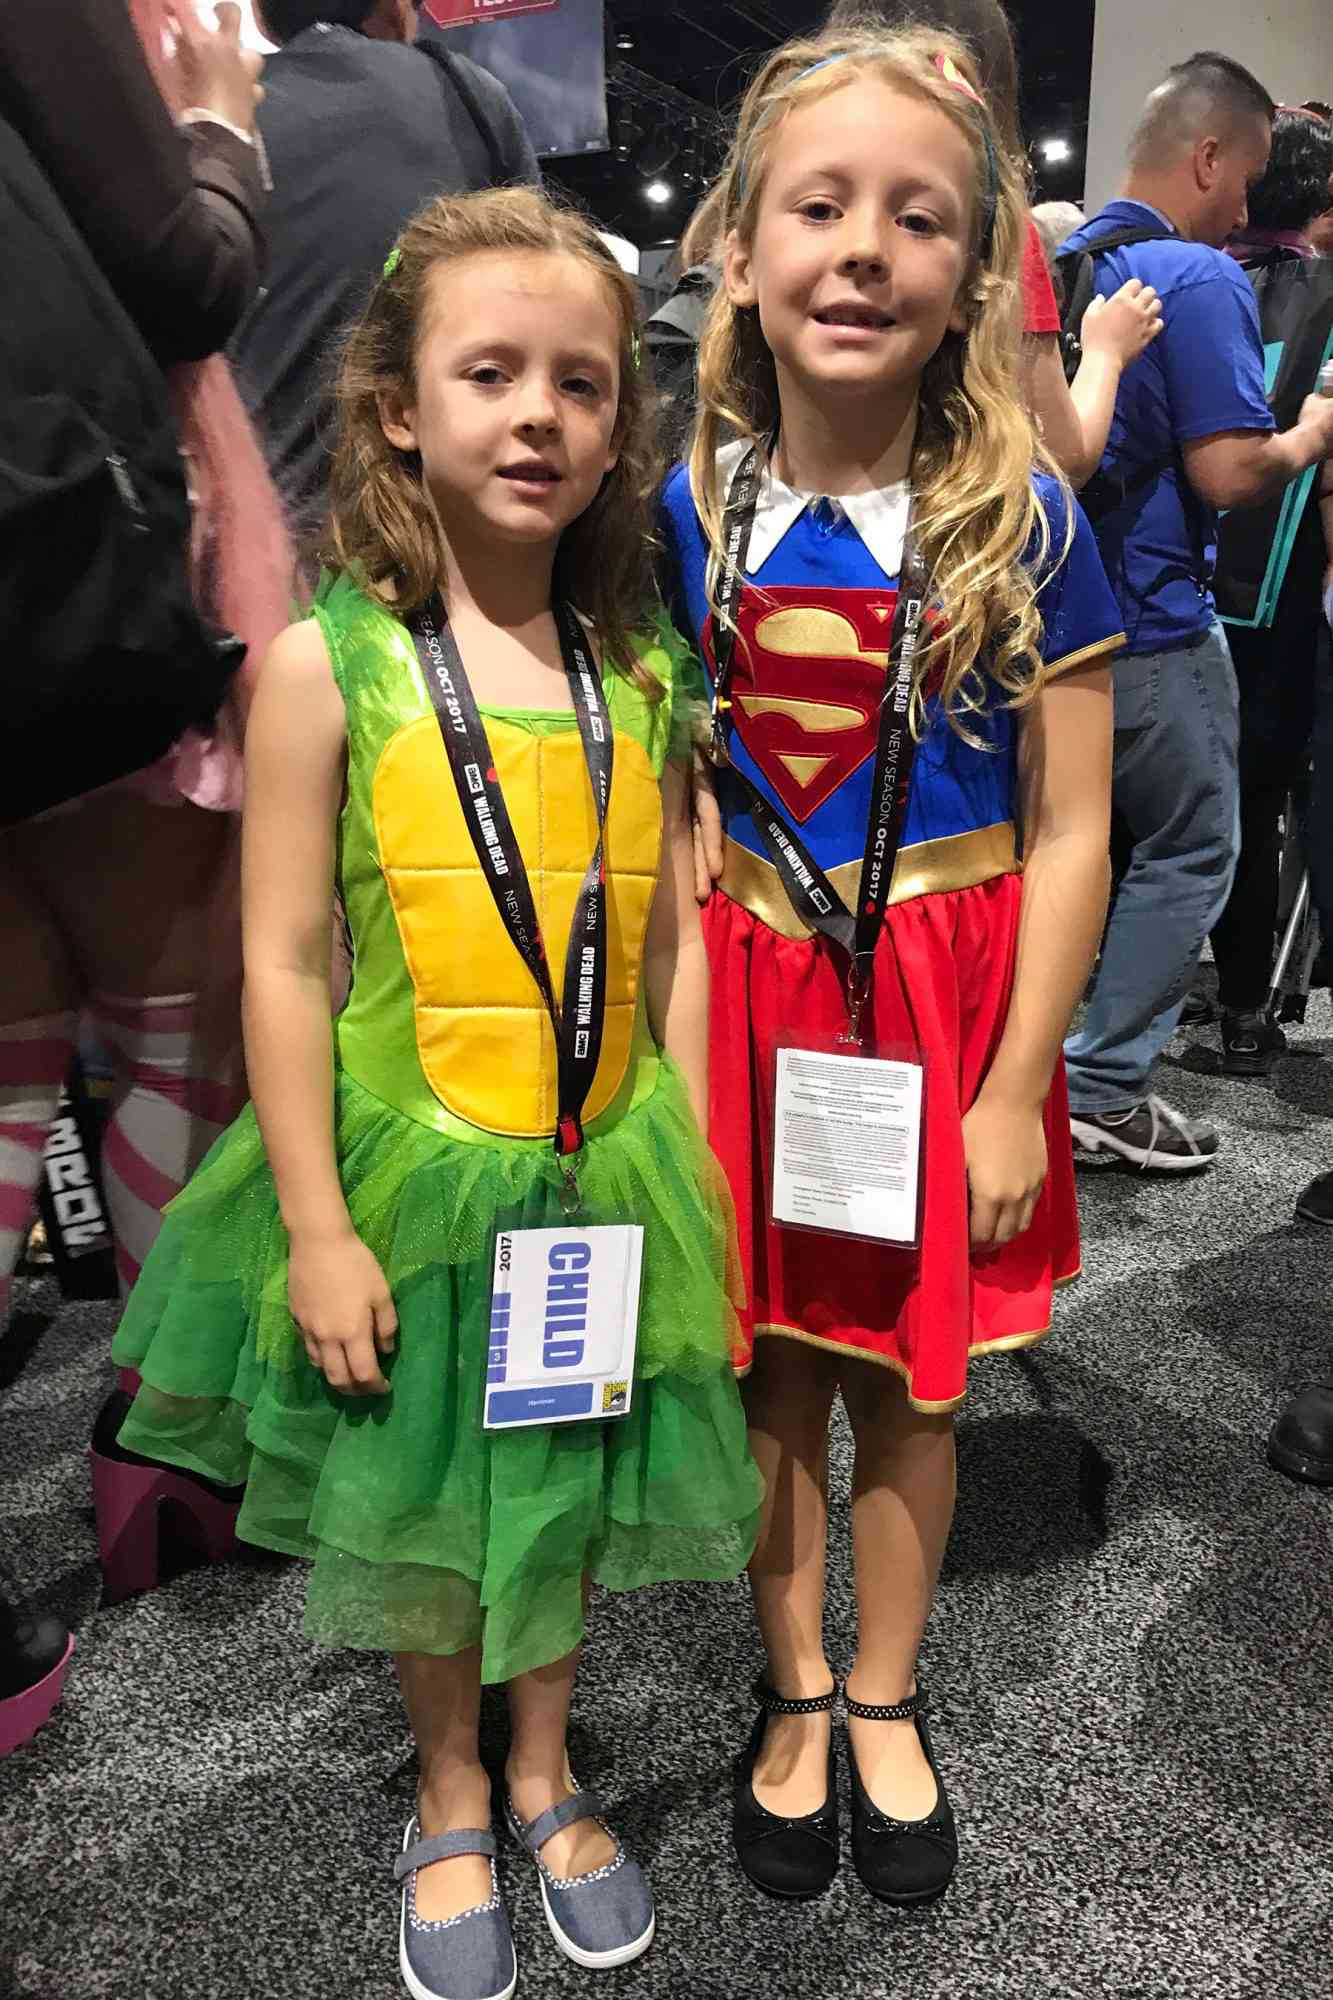 Comic Con 2017 Girls dressed as superheroes Photo Credit: Mary Sollosi for EW